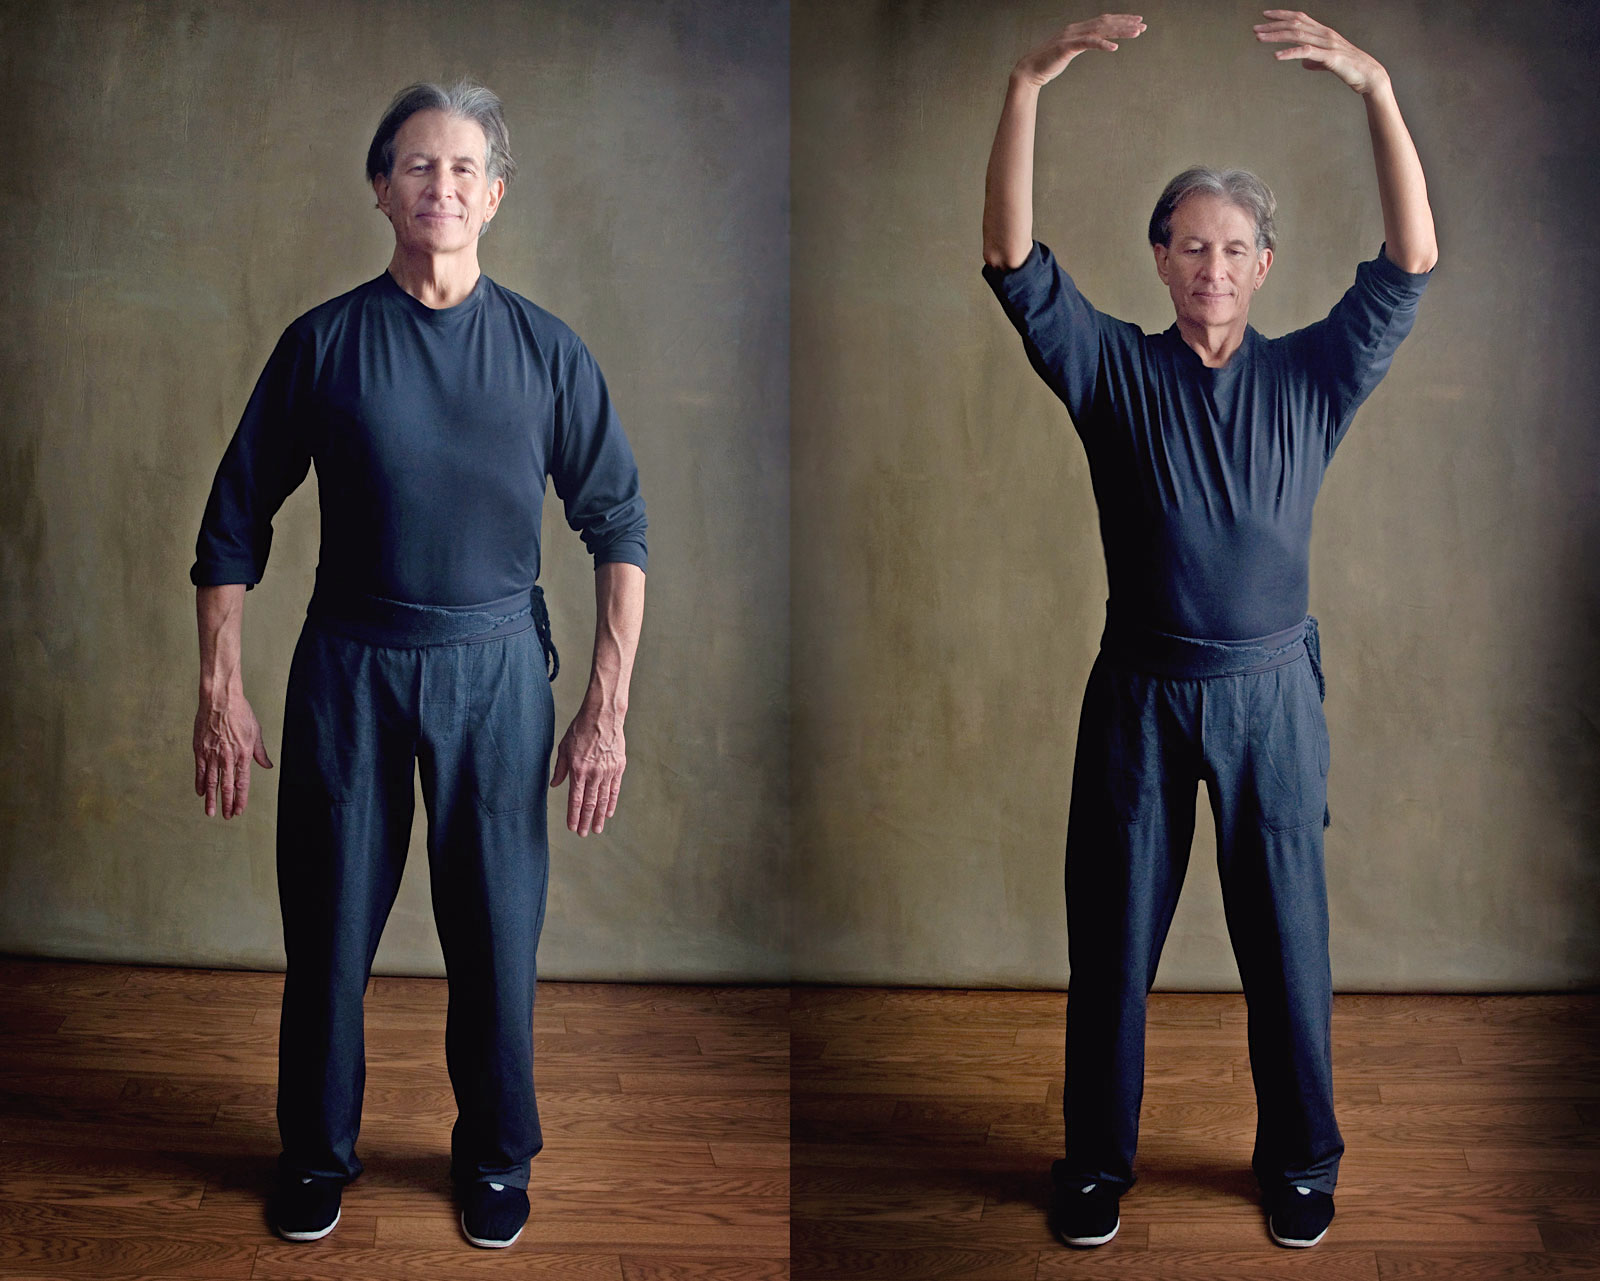 Qi Gong : 15 exercices Qi Gong